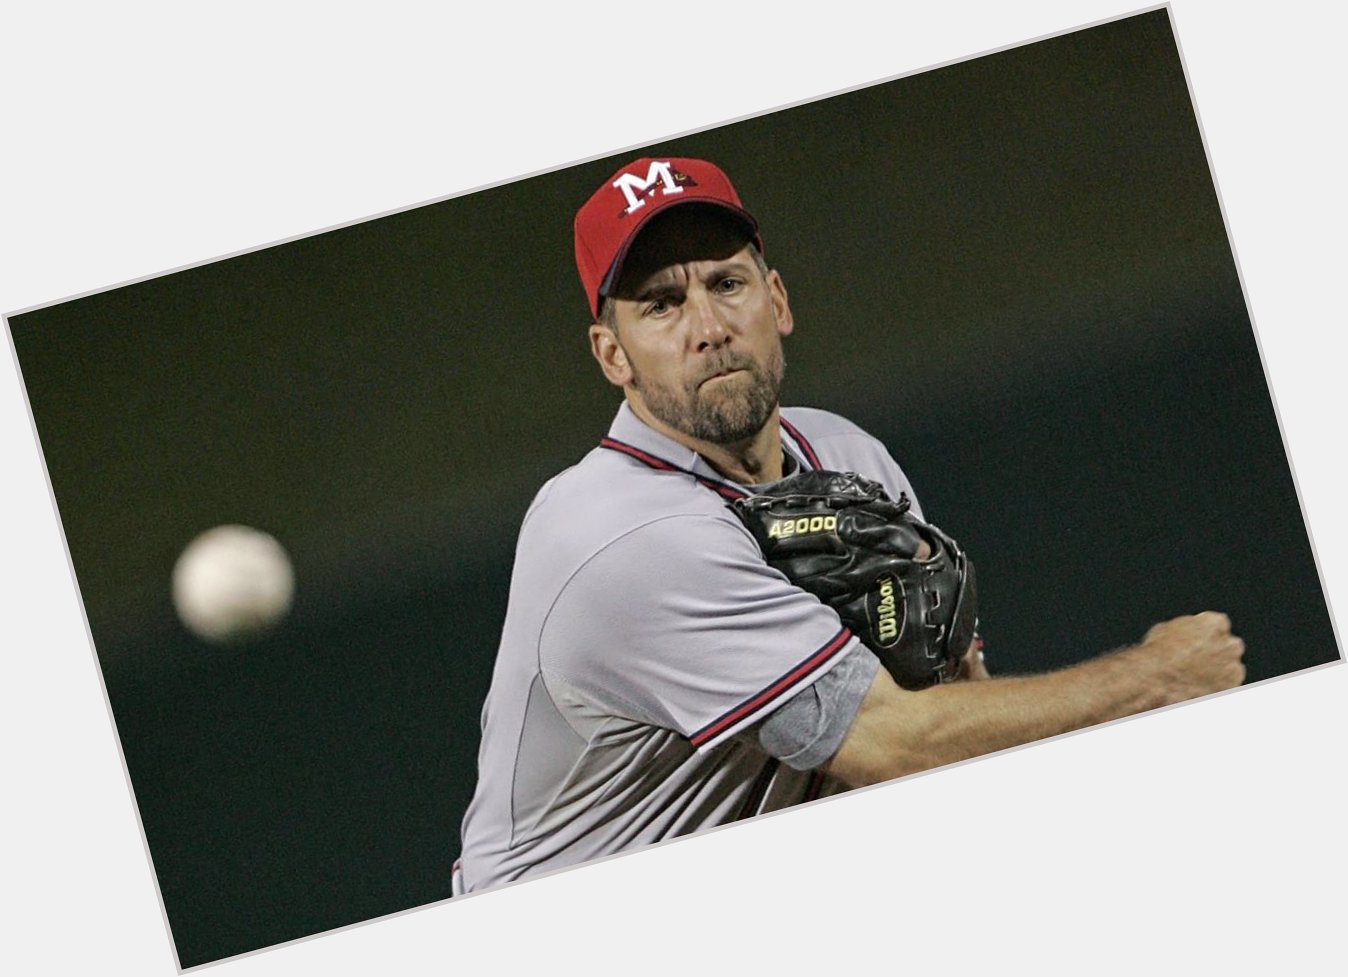 Happy birthday John Smoltz! Smoltz made one rehab start for the M-Braves on May 24, 2008 at Tennessee. 